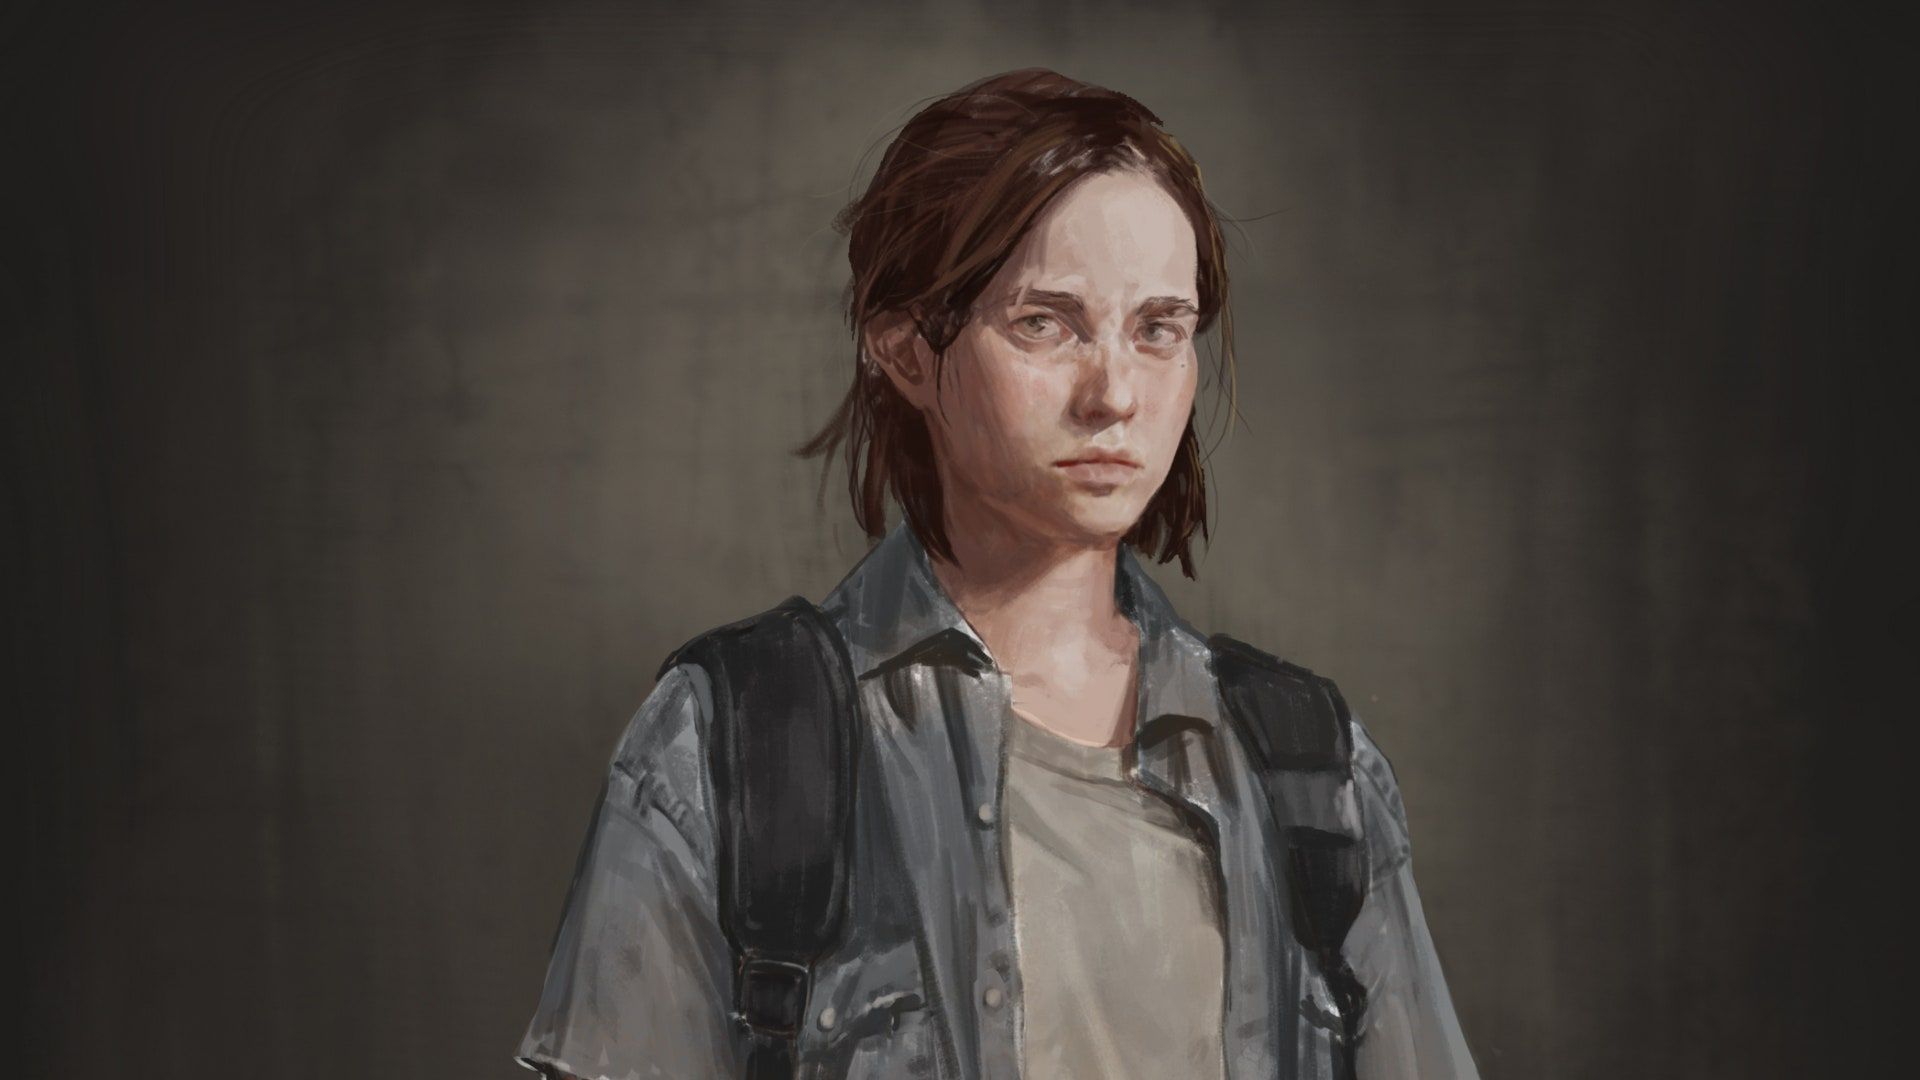 The Last Of Us Part II: how Neil Druckmann made a masterpiece